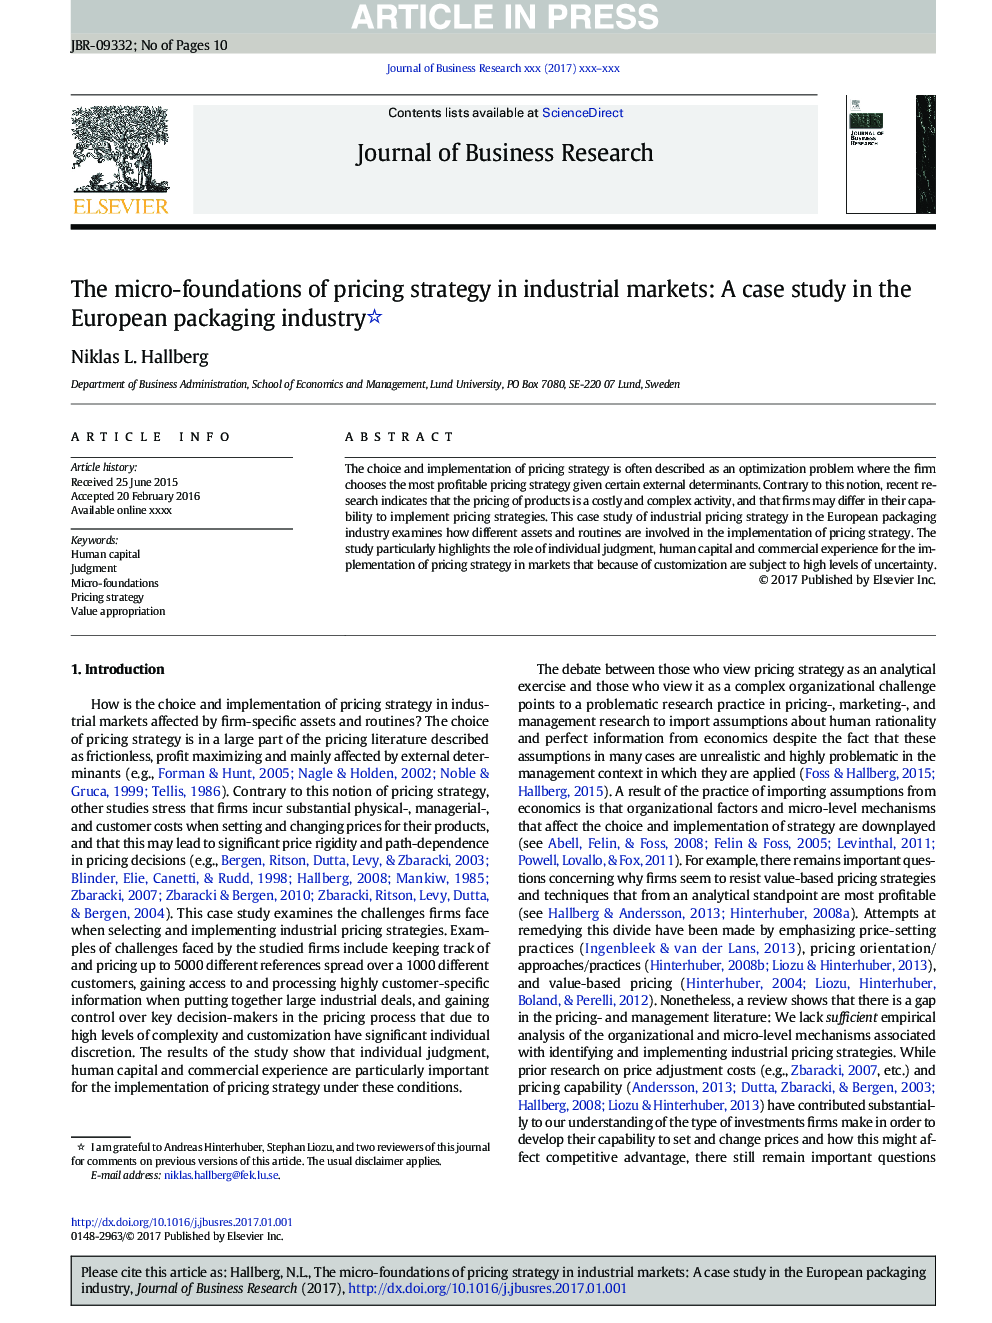 The micro-foundations of pricing strategy in industrial markets: A case study in the European packaging industry